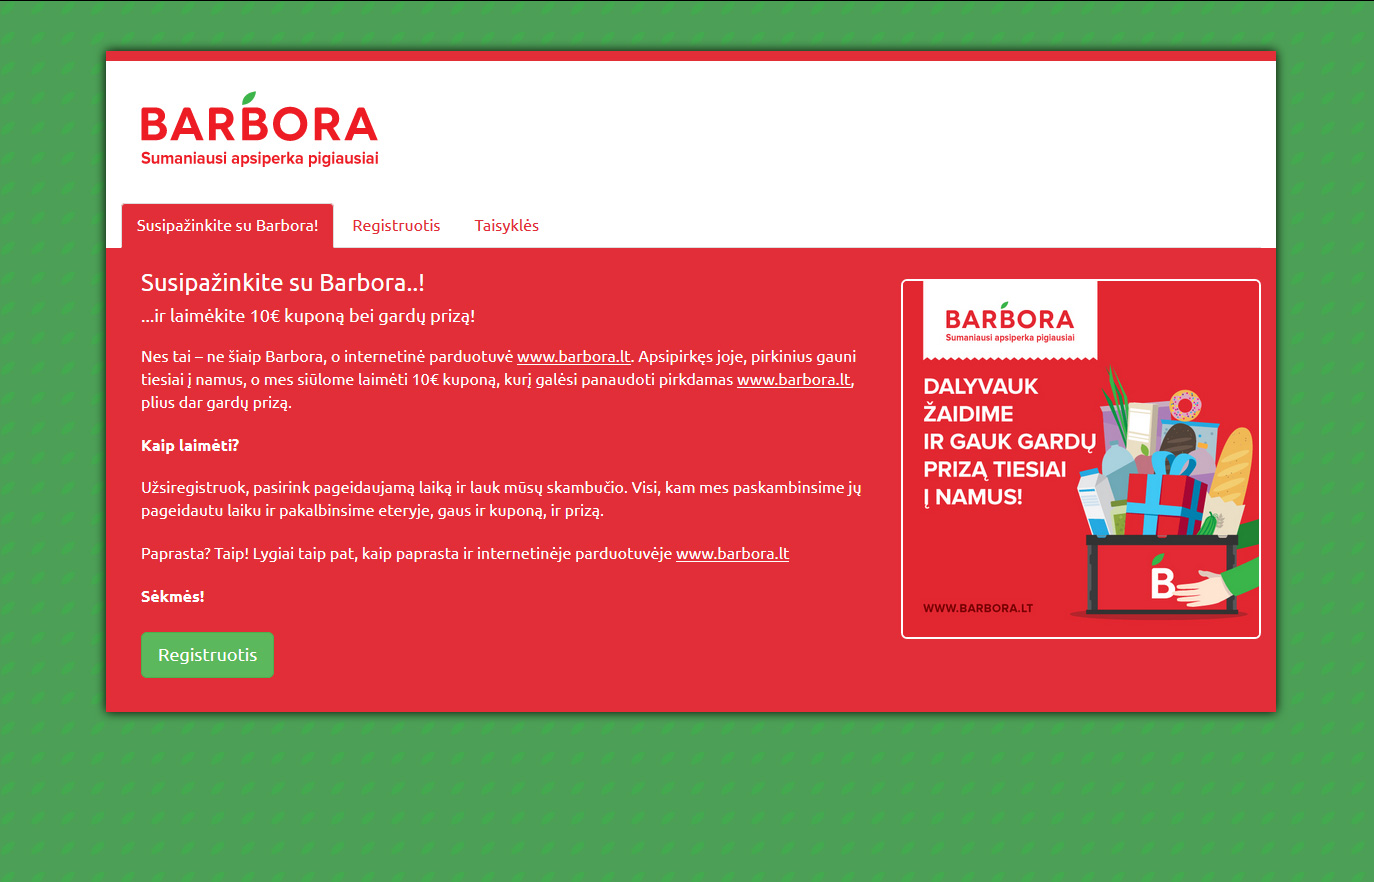 Barbora - online contest and landing page